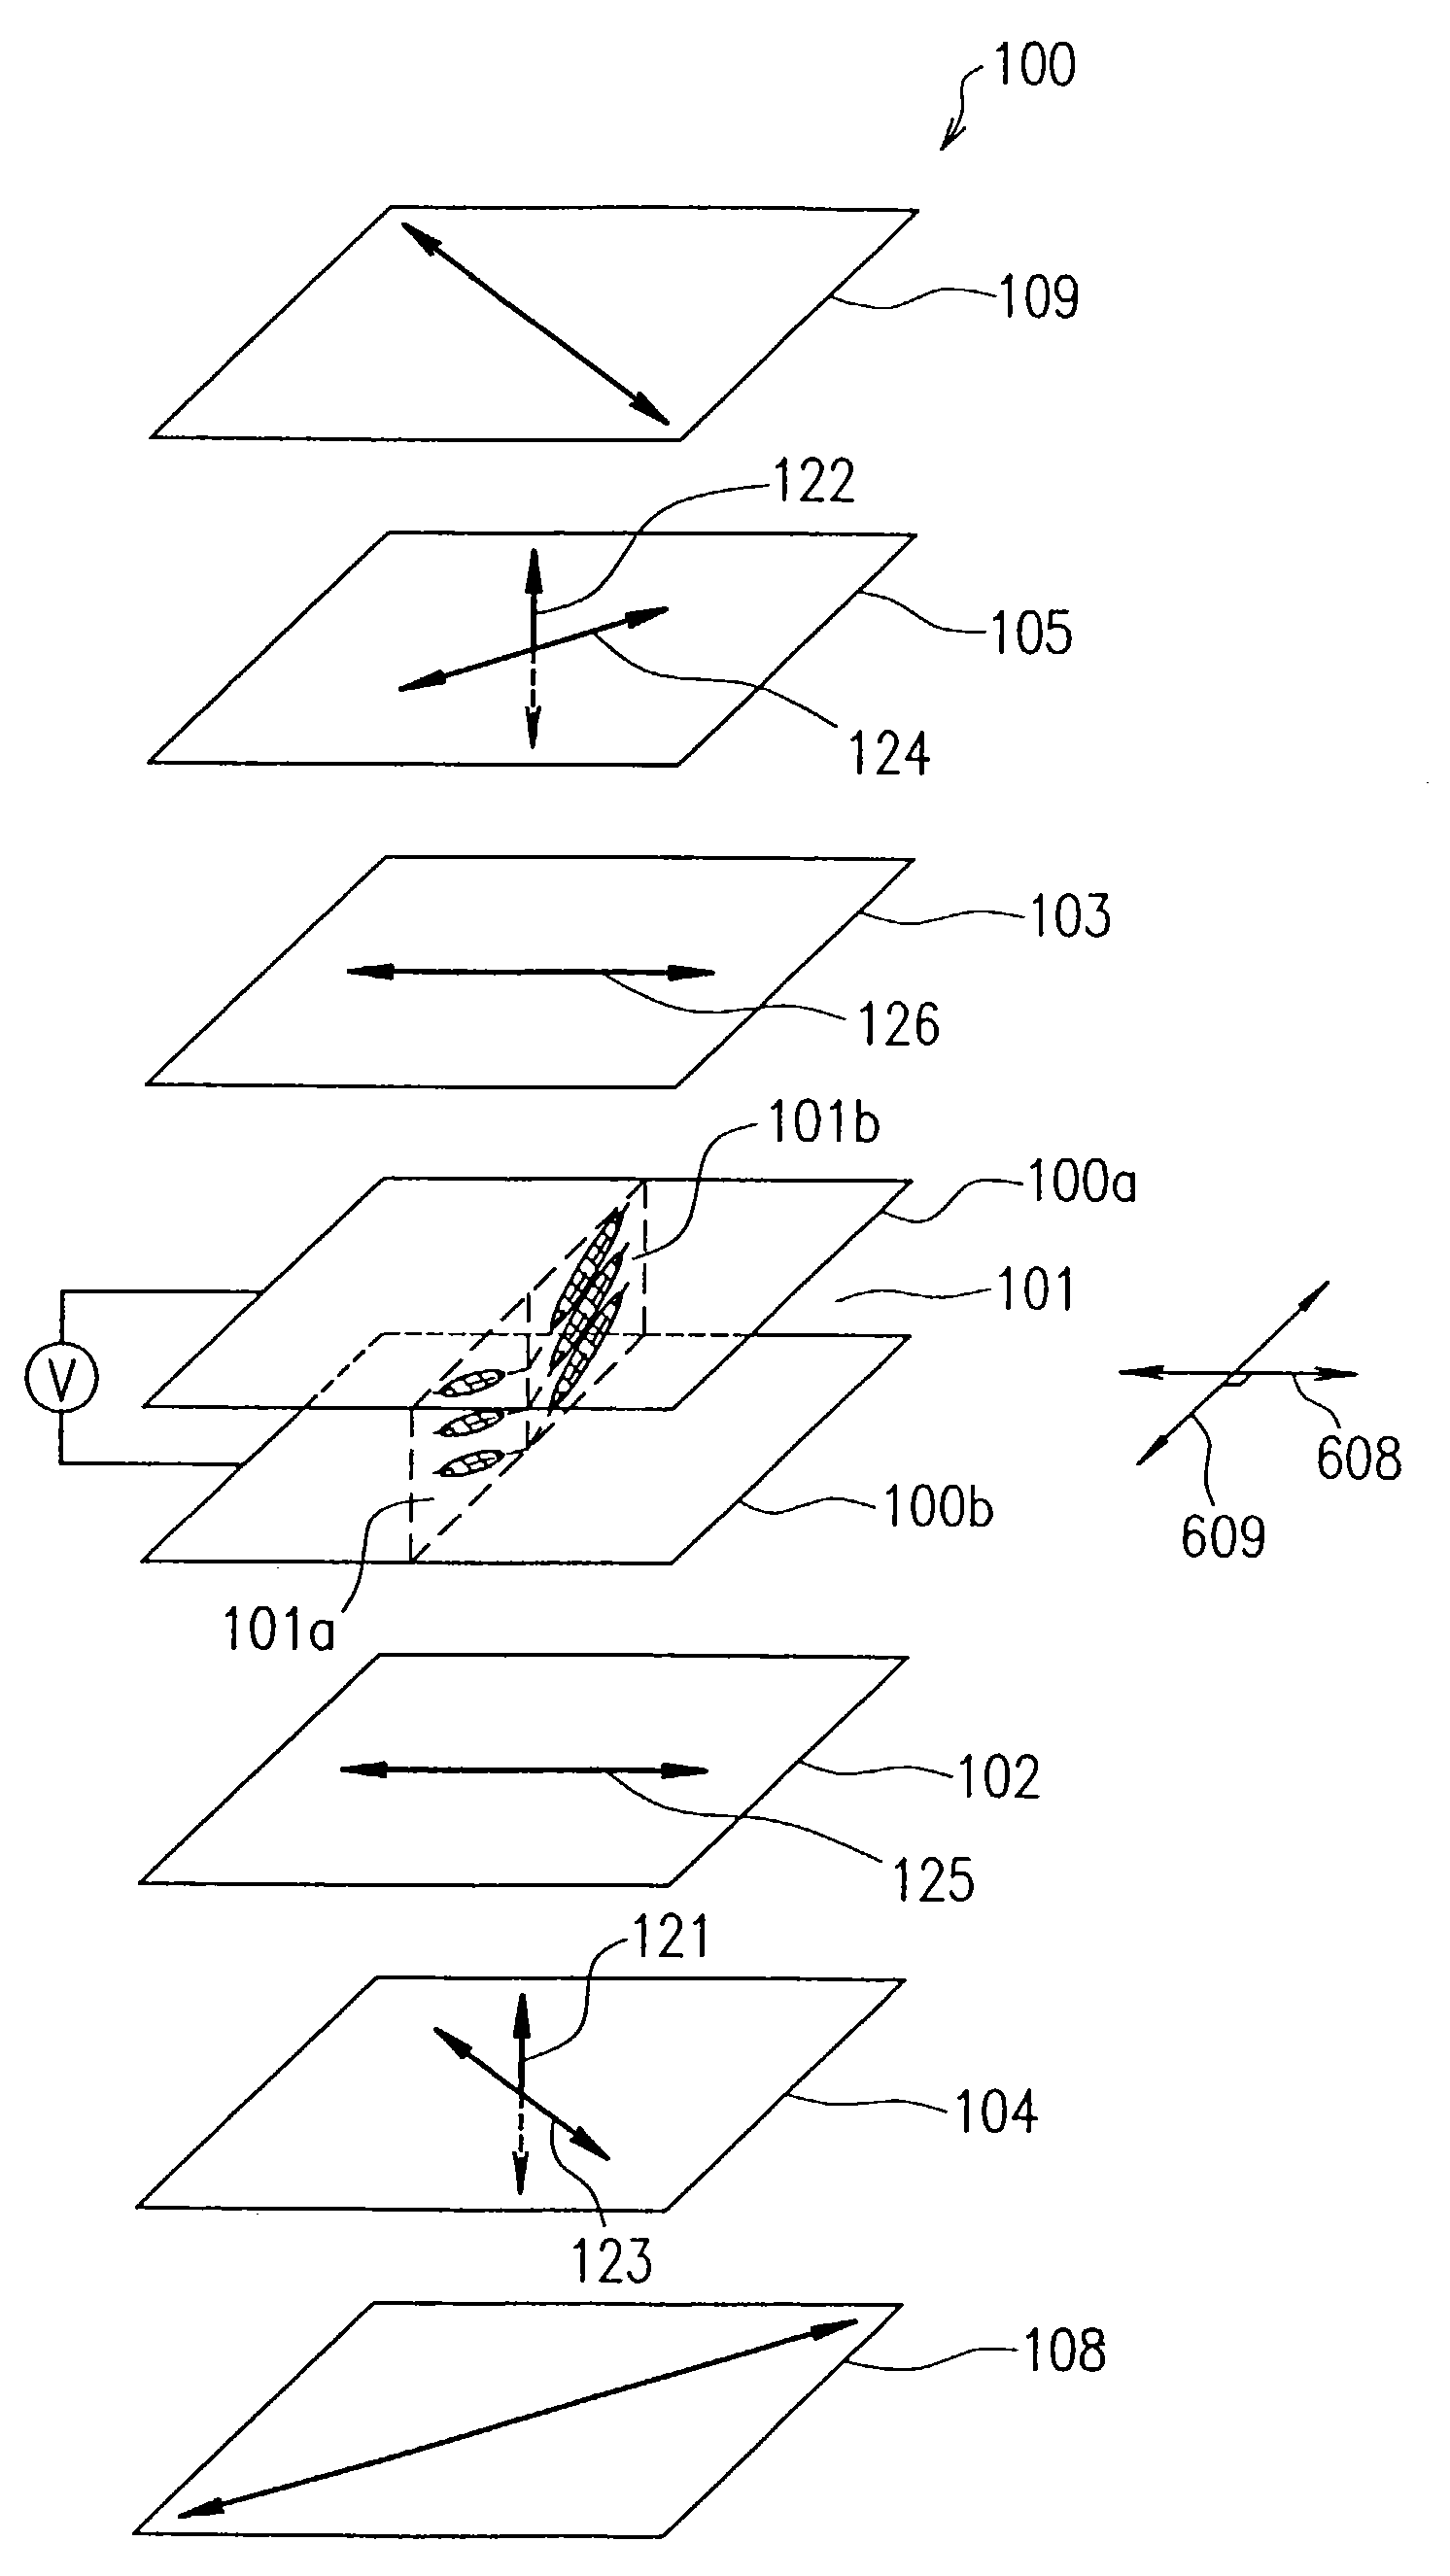 Nematic liquid crystal display device with multi-domain pixels and six phase difference compensators